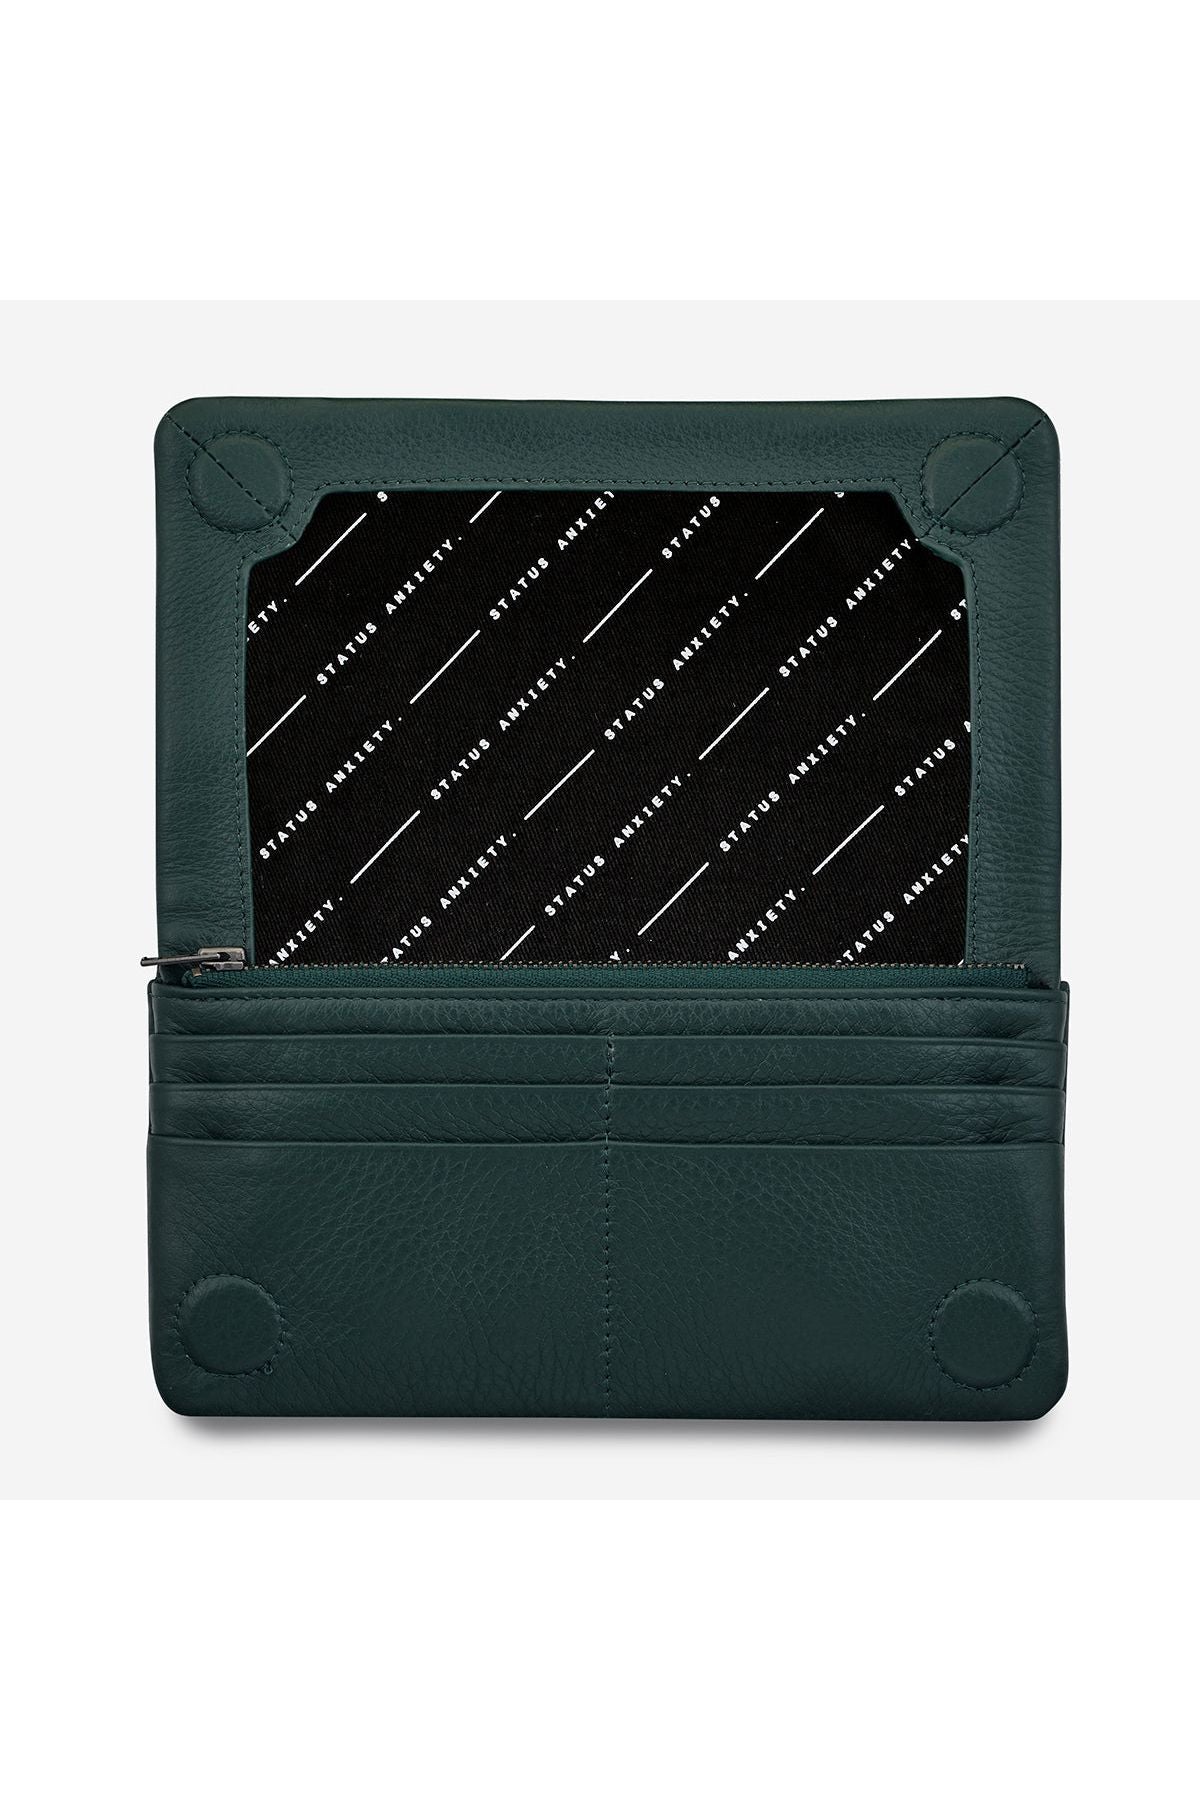 Status Anxiety - Some Type of Love Wallet - Teal